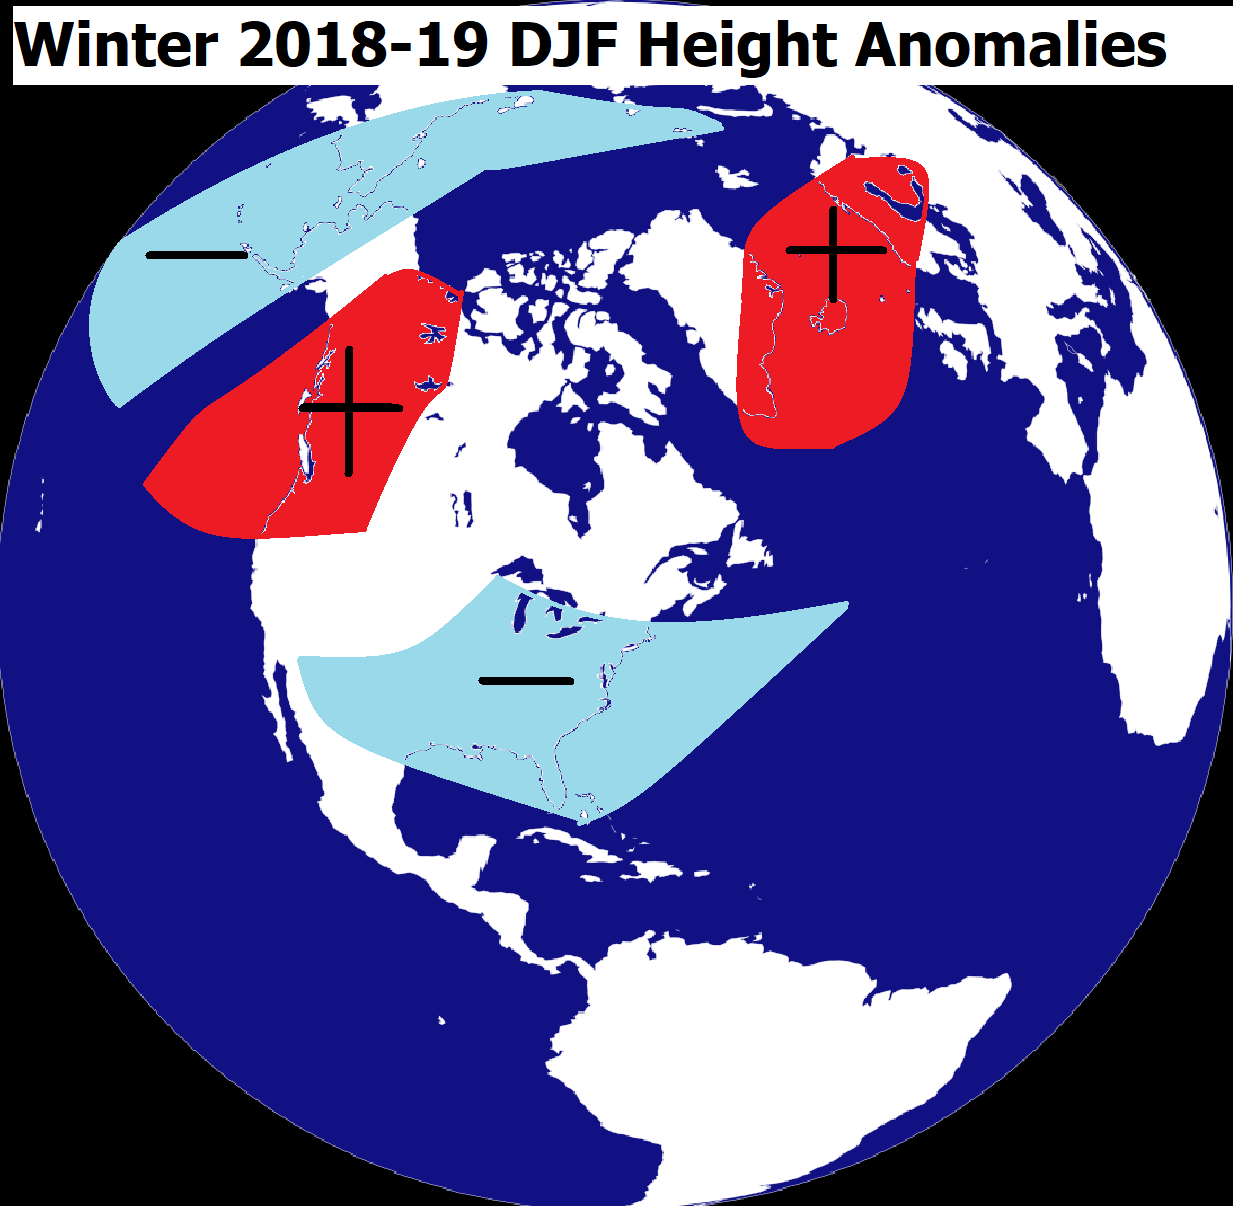 DJF HEIGHT ANOMALY FCST